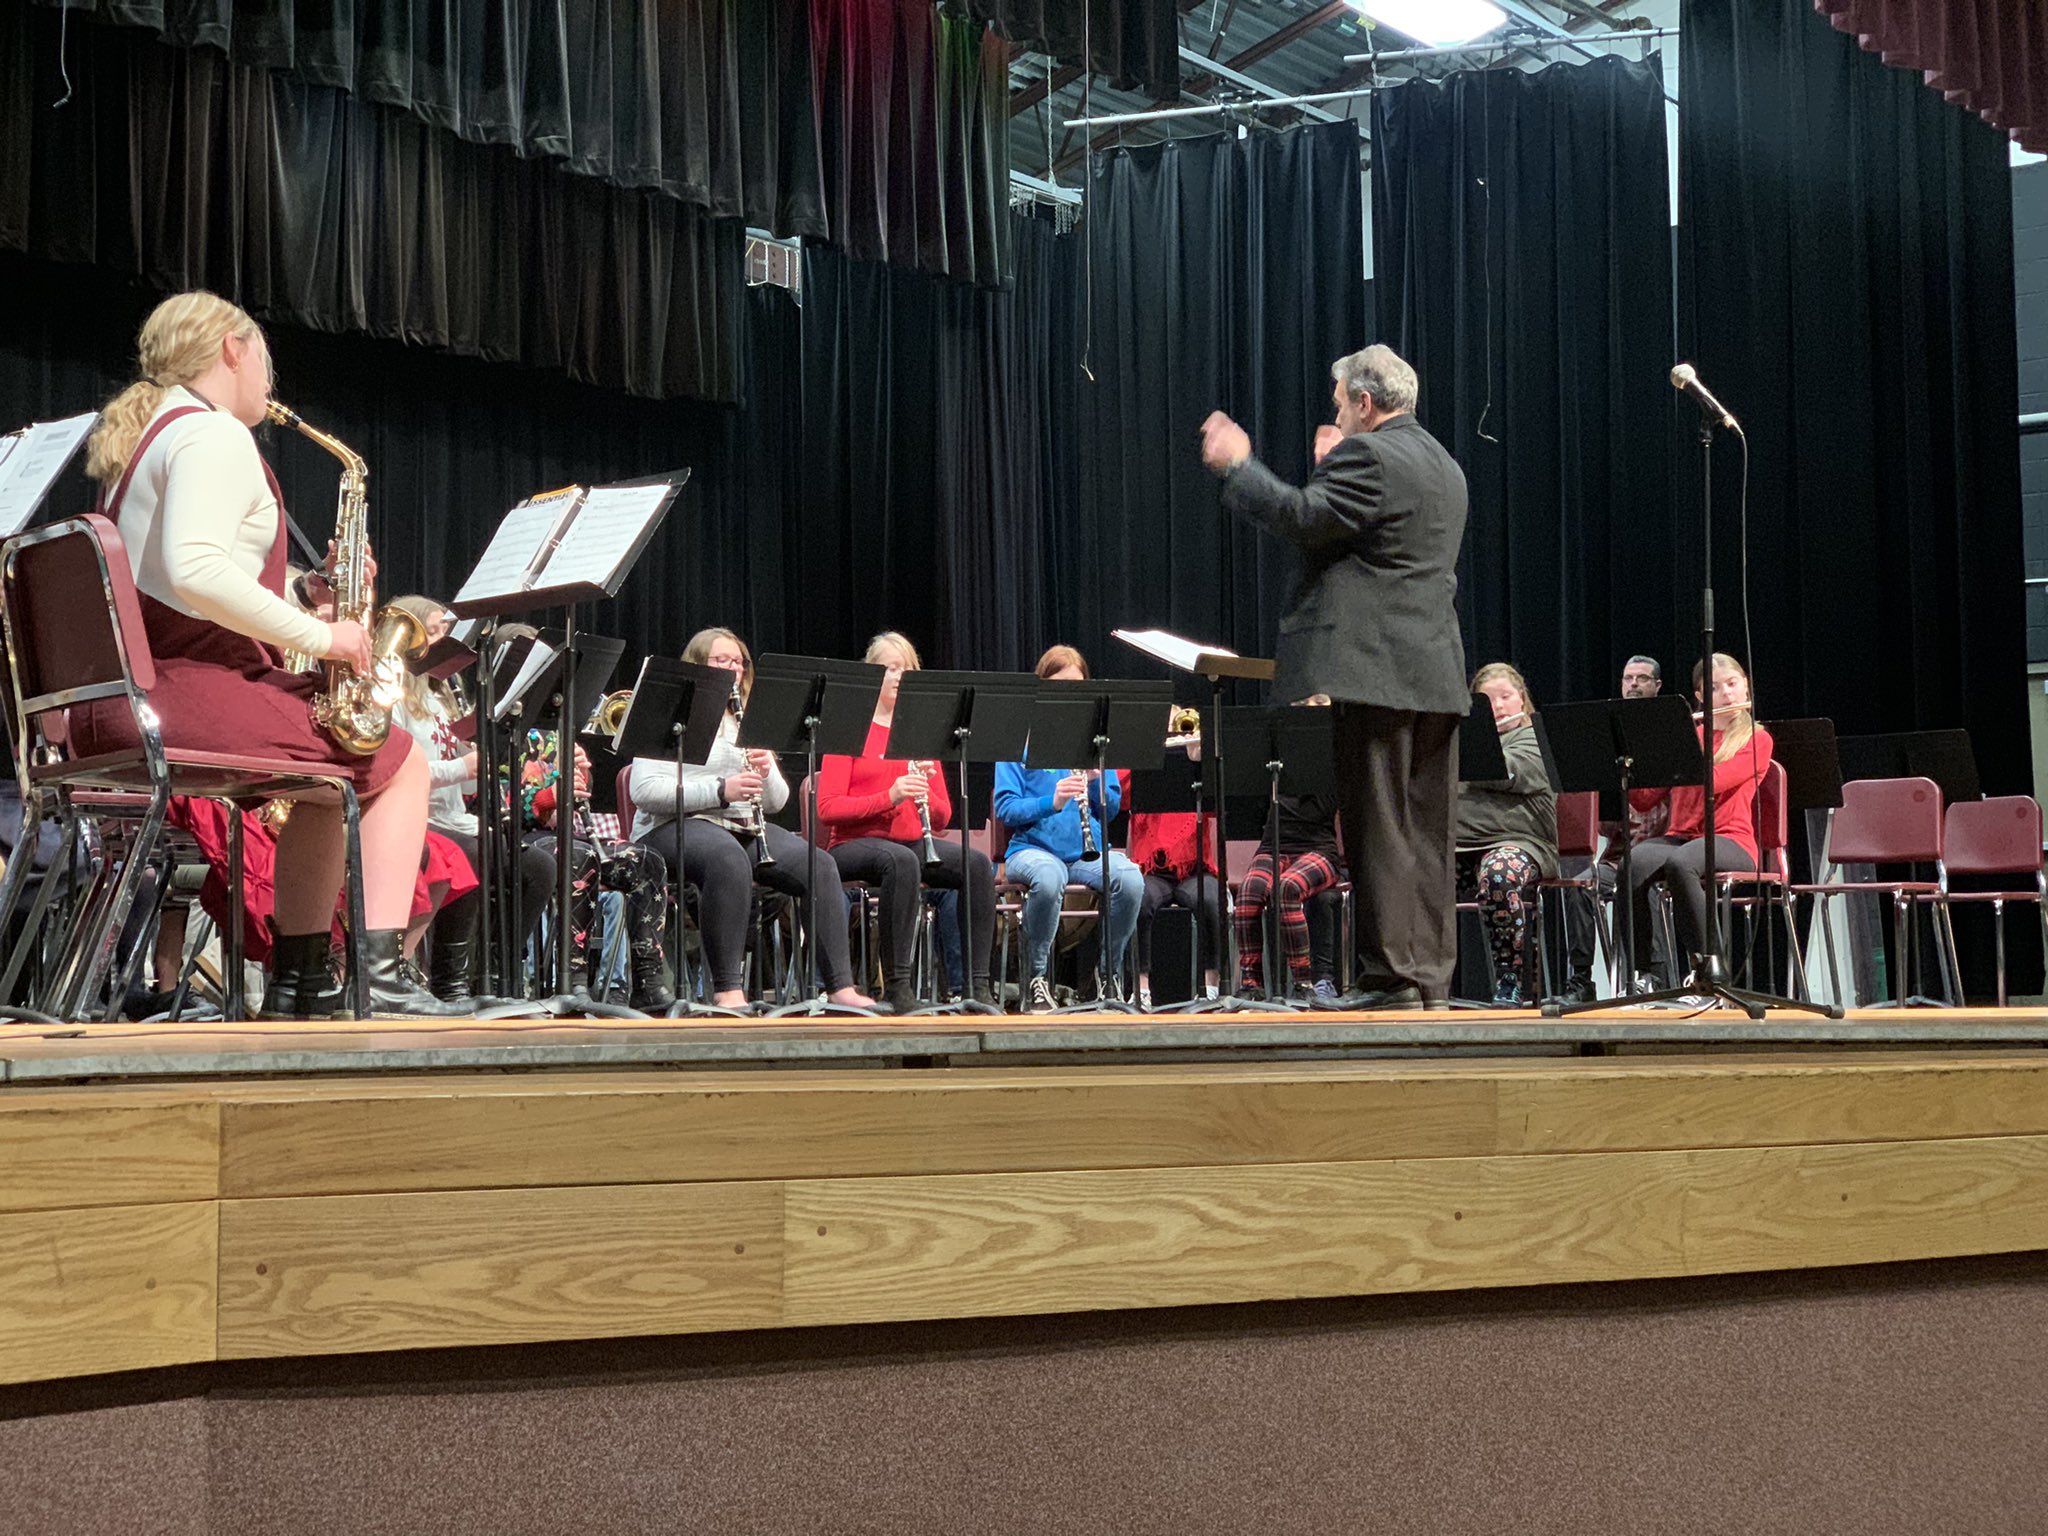 Students play a band concert on the stage with the band director leading them.